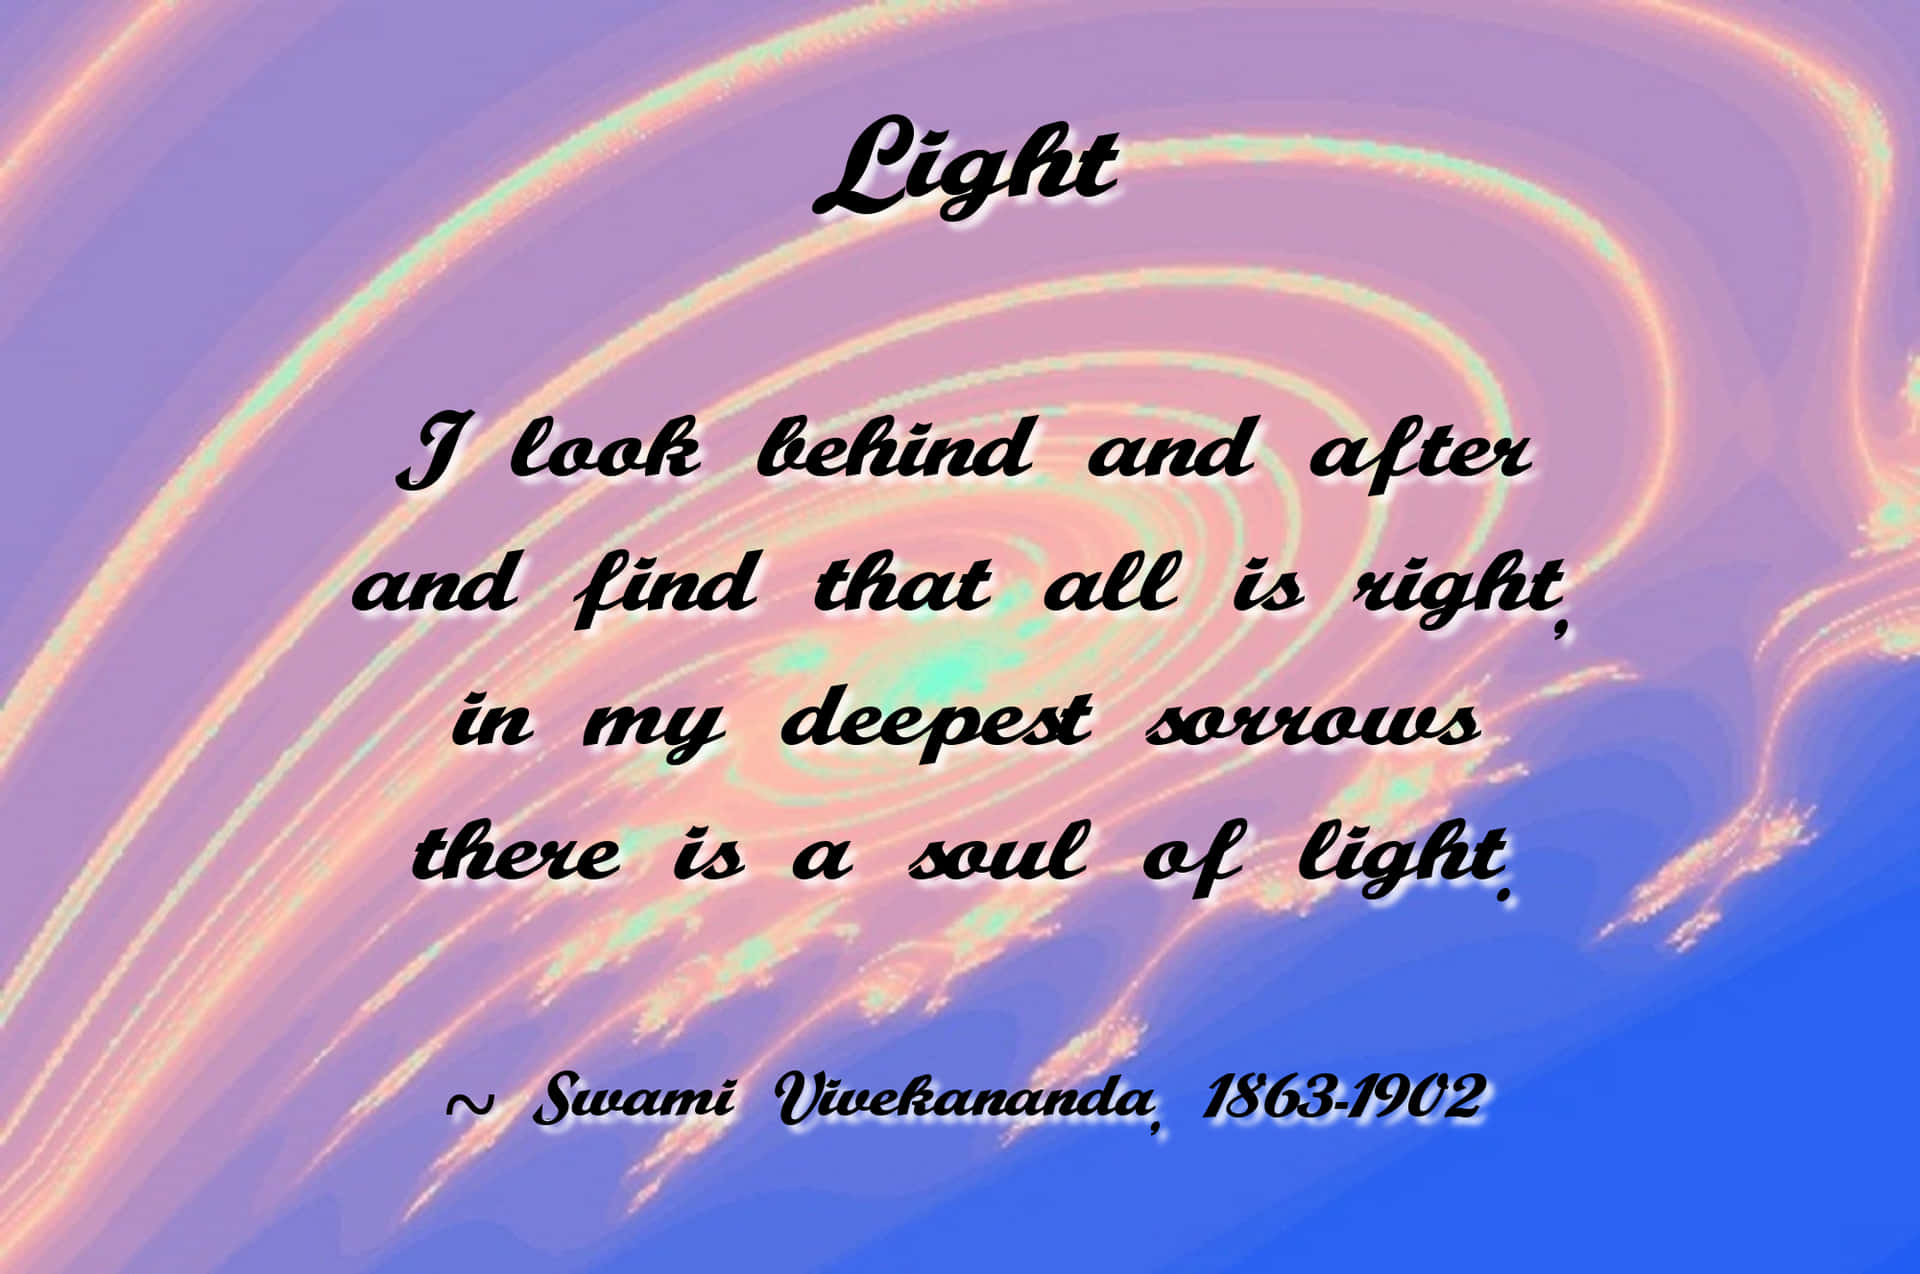 A Quote About Light That Says, Look Behind And After And Find That All Is Right In My Deepest Soul Of Light